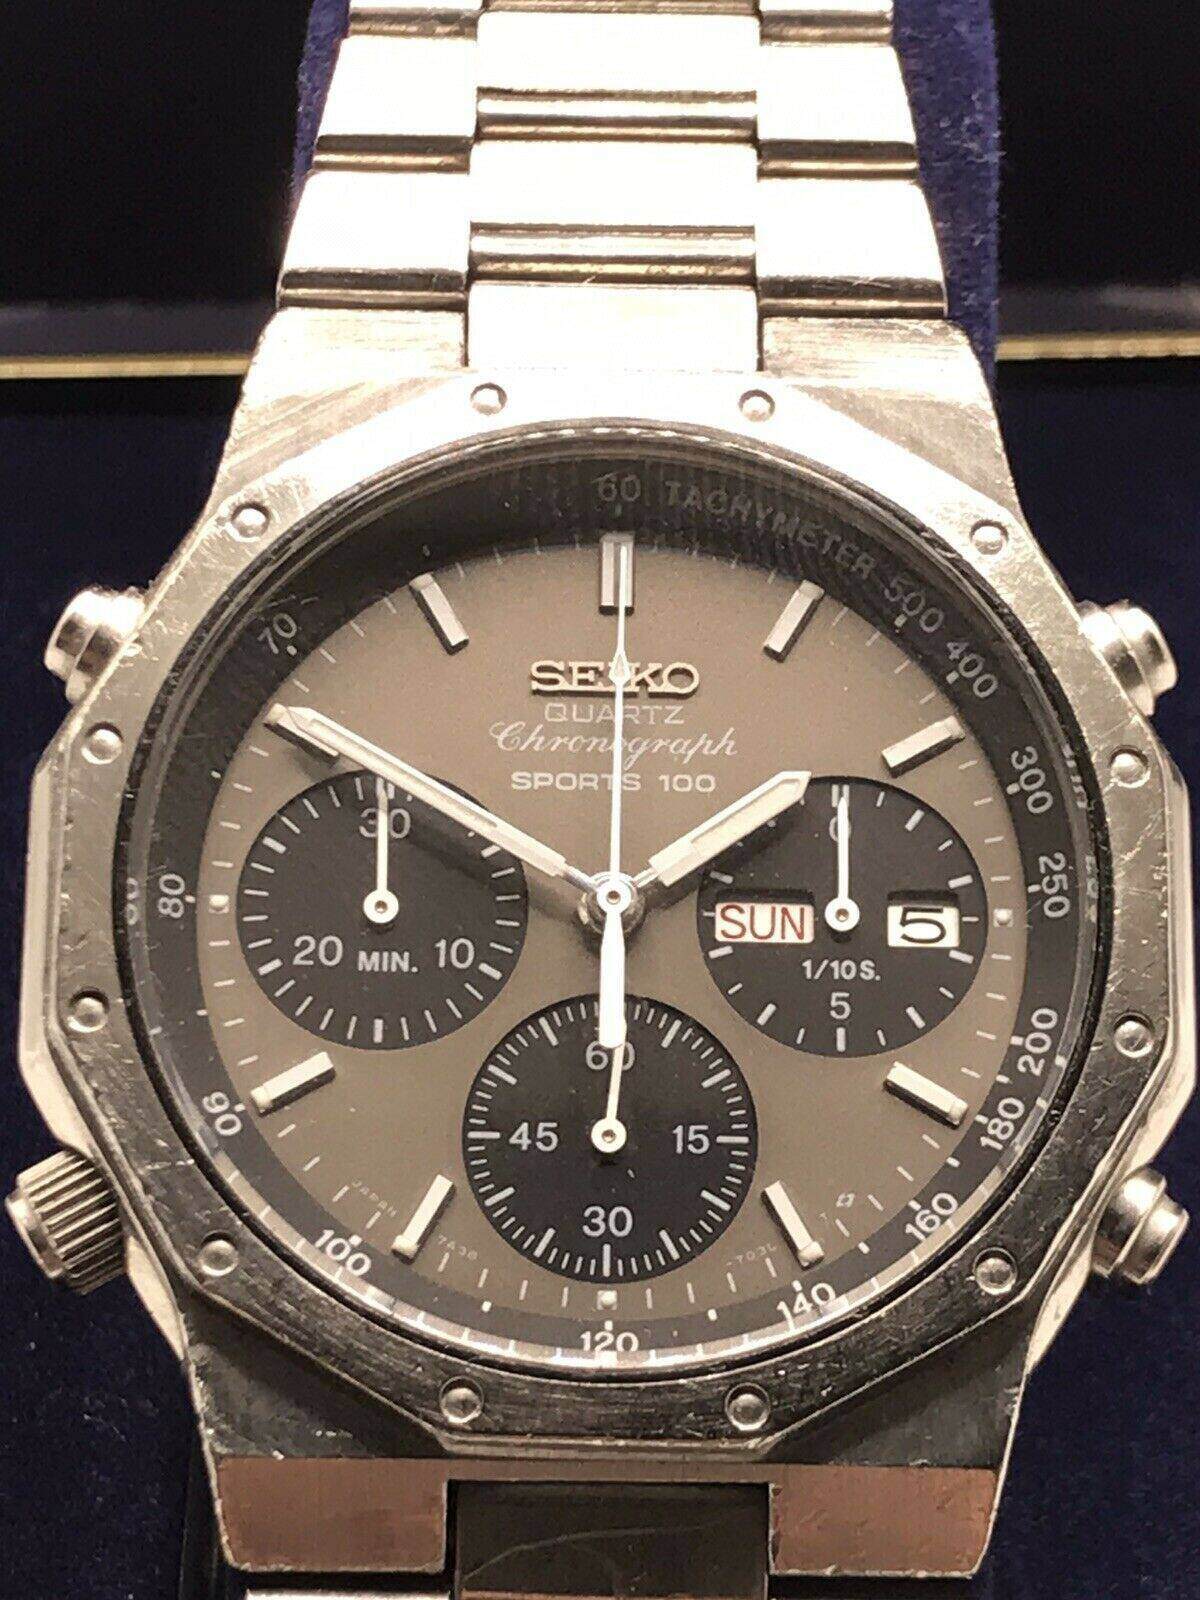 rsz_7a38-7020-stainless-grey-ebaygermany-dec2021-andanother-re-seller-2.jpg